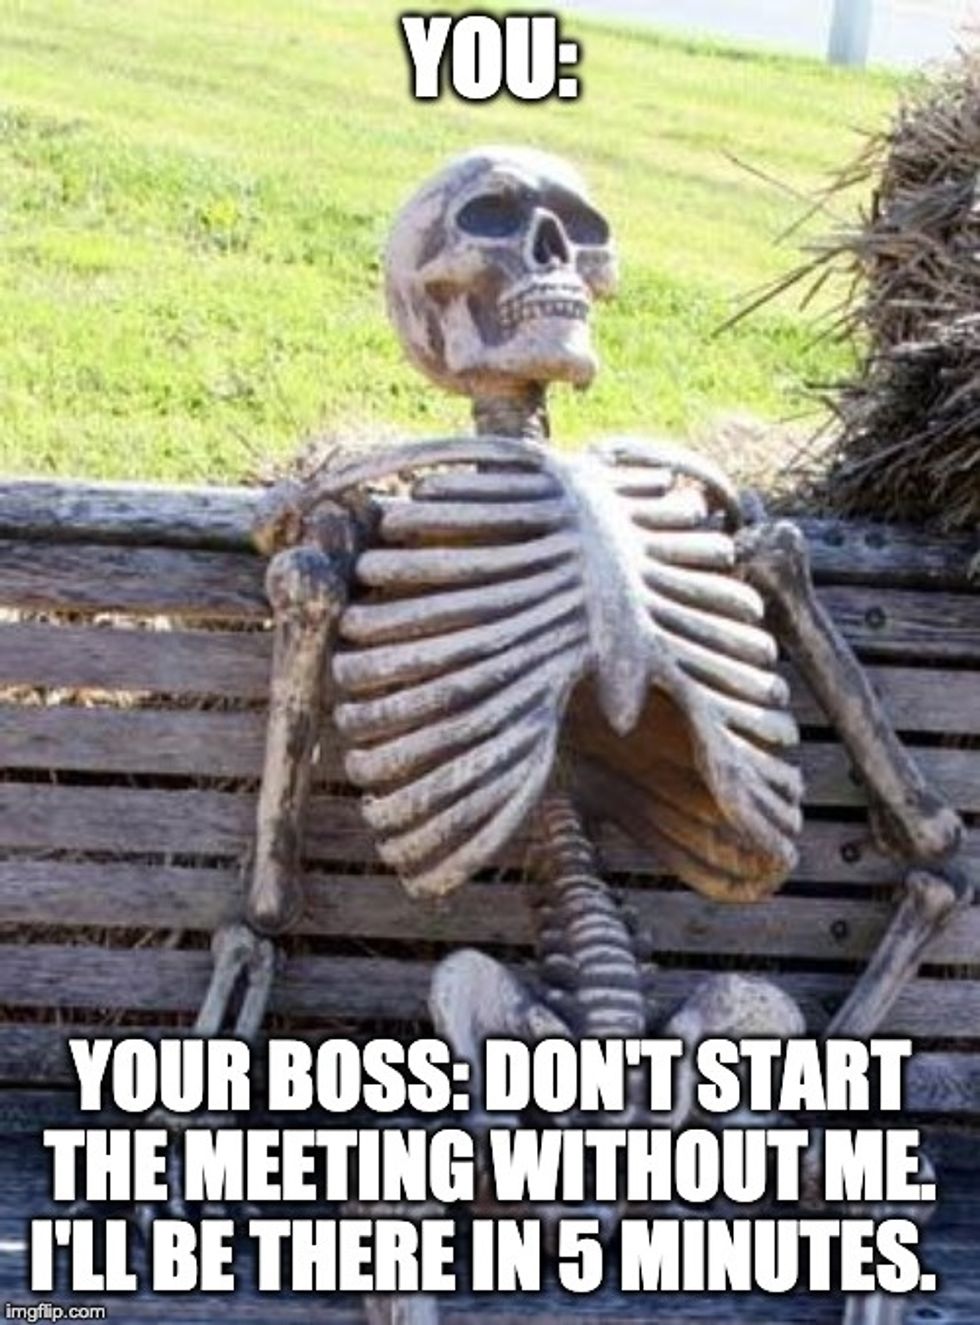 Waiting Skeleton boss meme - You, now a skeleton, waiting for your boss "Don't start the meeting without me, I'll be there in 5 minutes."